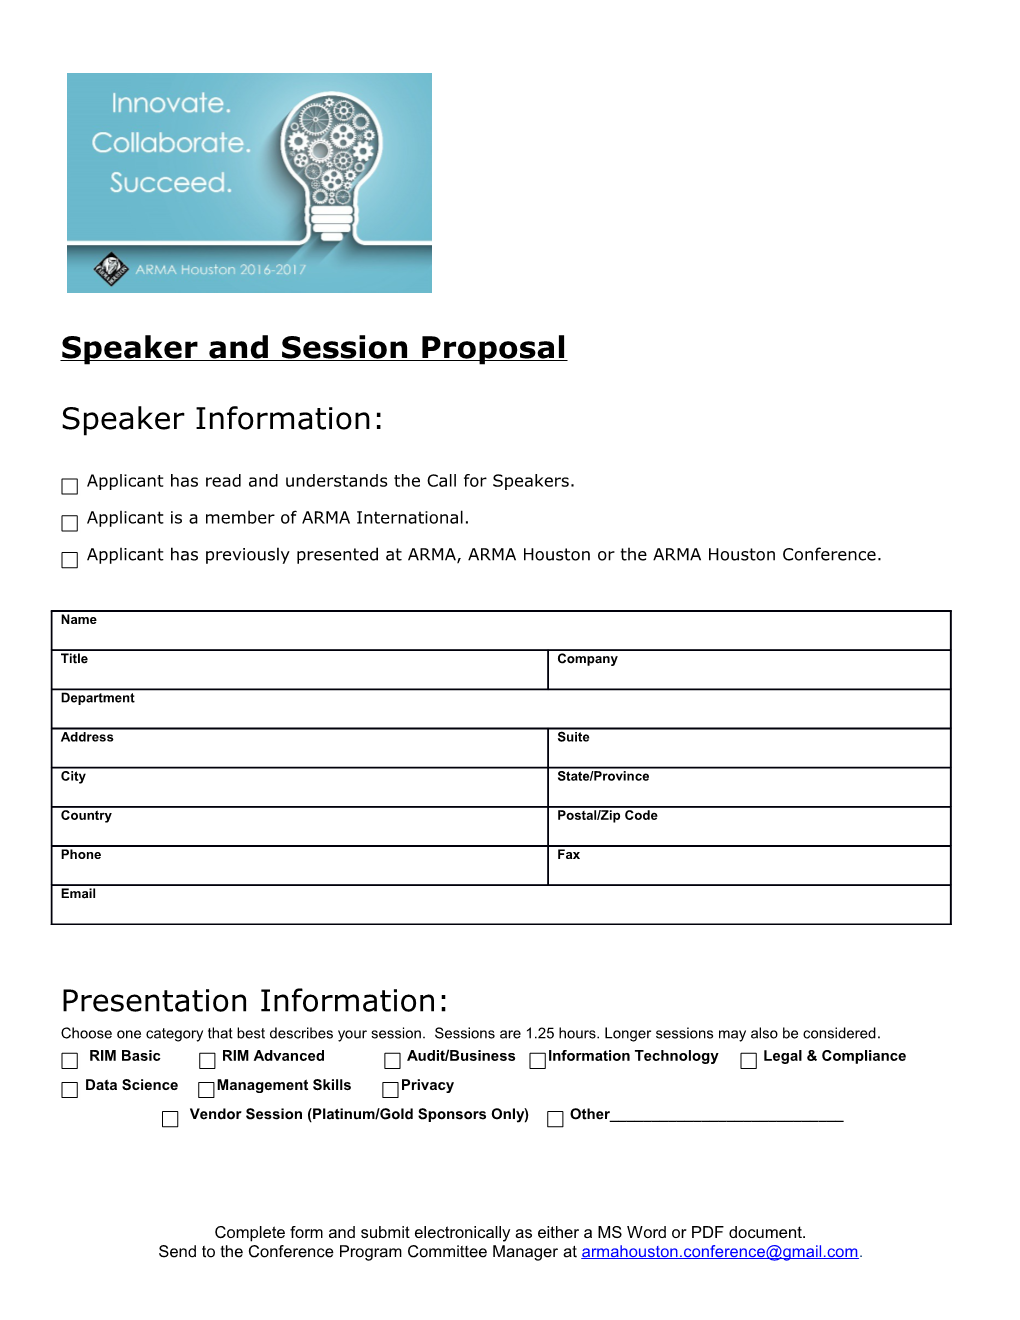 Speaker and Session Proposal